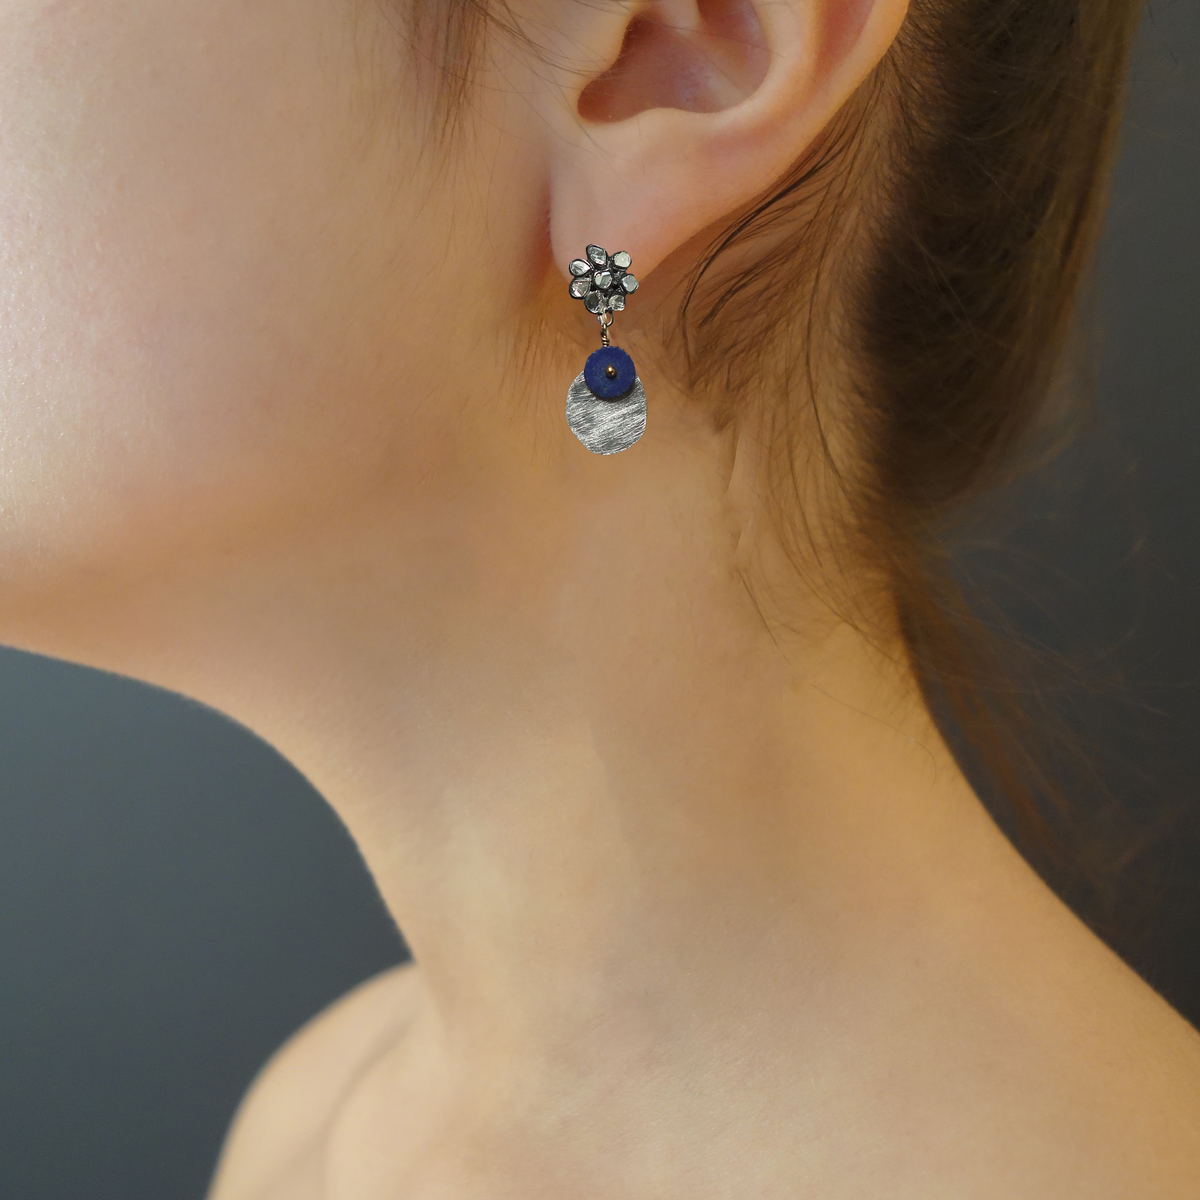 Ancient Elements: sliced diamonds, lapis, and silver earrings